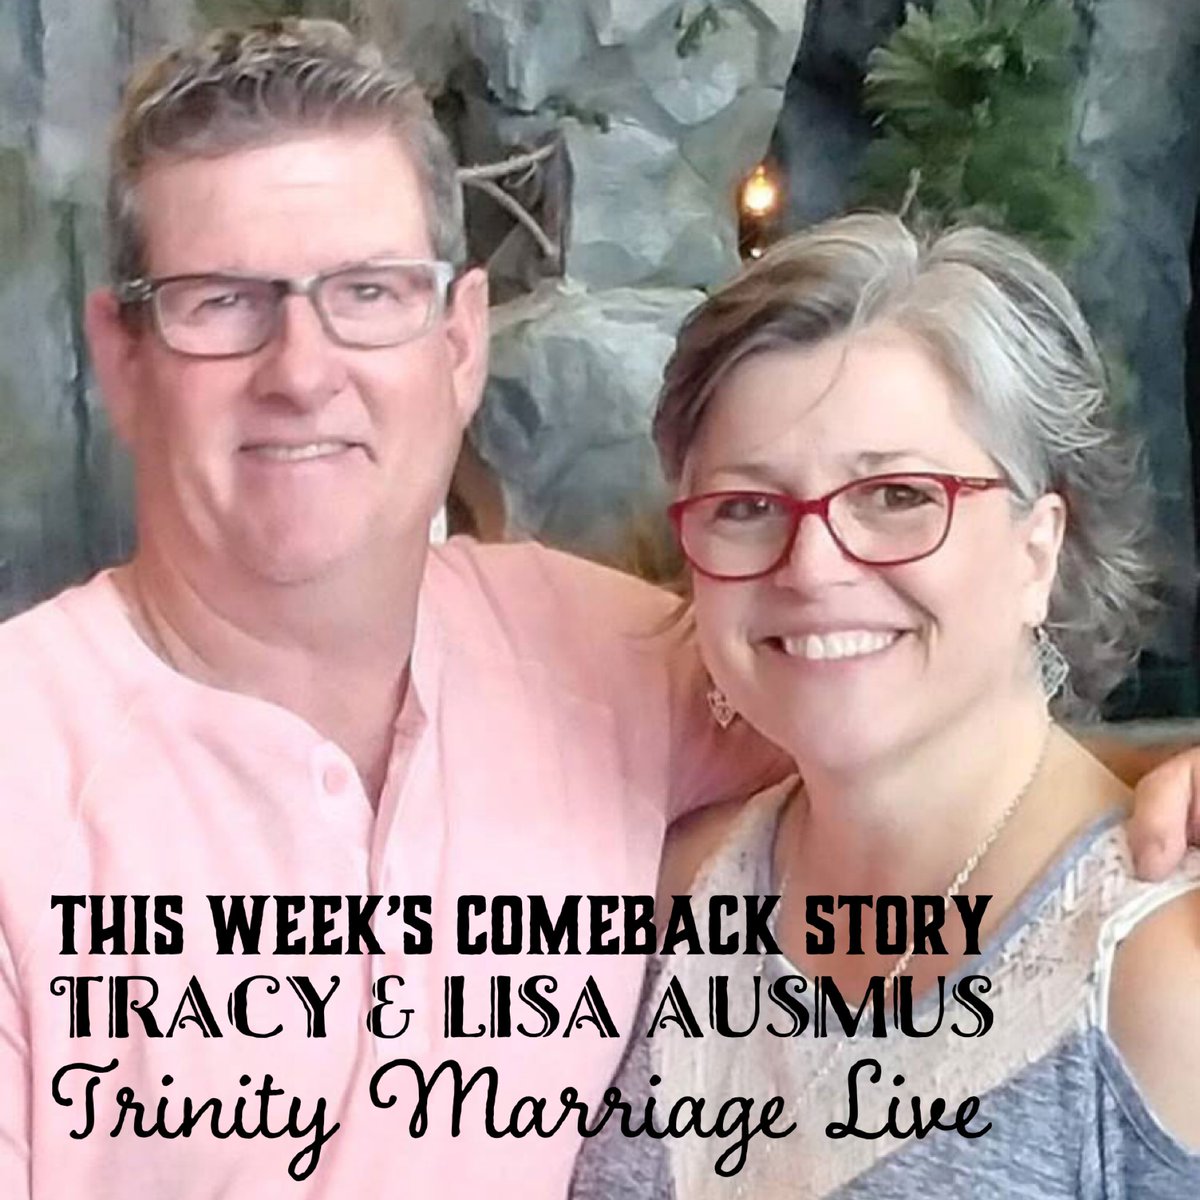 #comebackstories series: Only 3 weeks. Join us this week for a light Mexican dinner, connecting with married couples and another inspiring story to increase our faith in Christ!